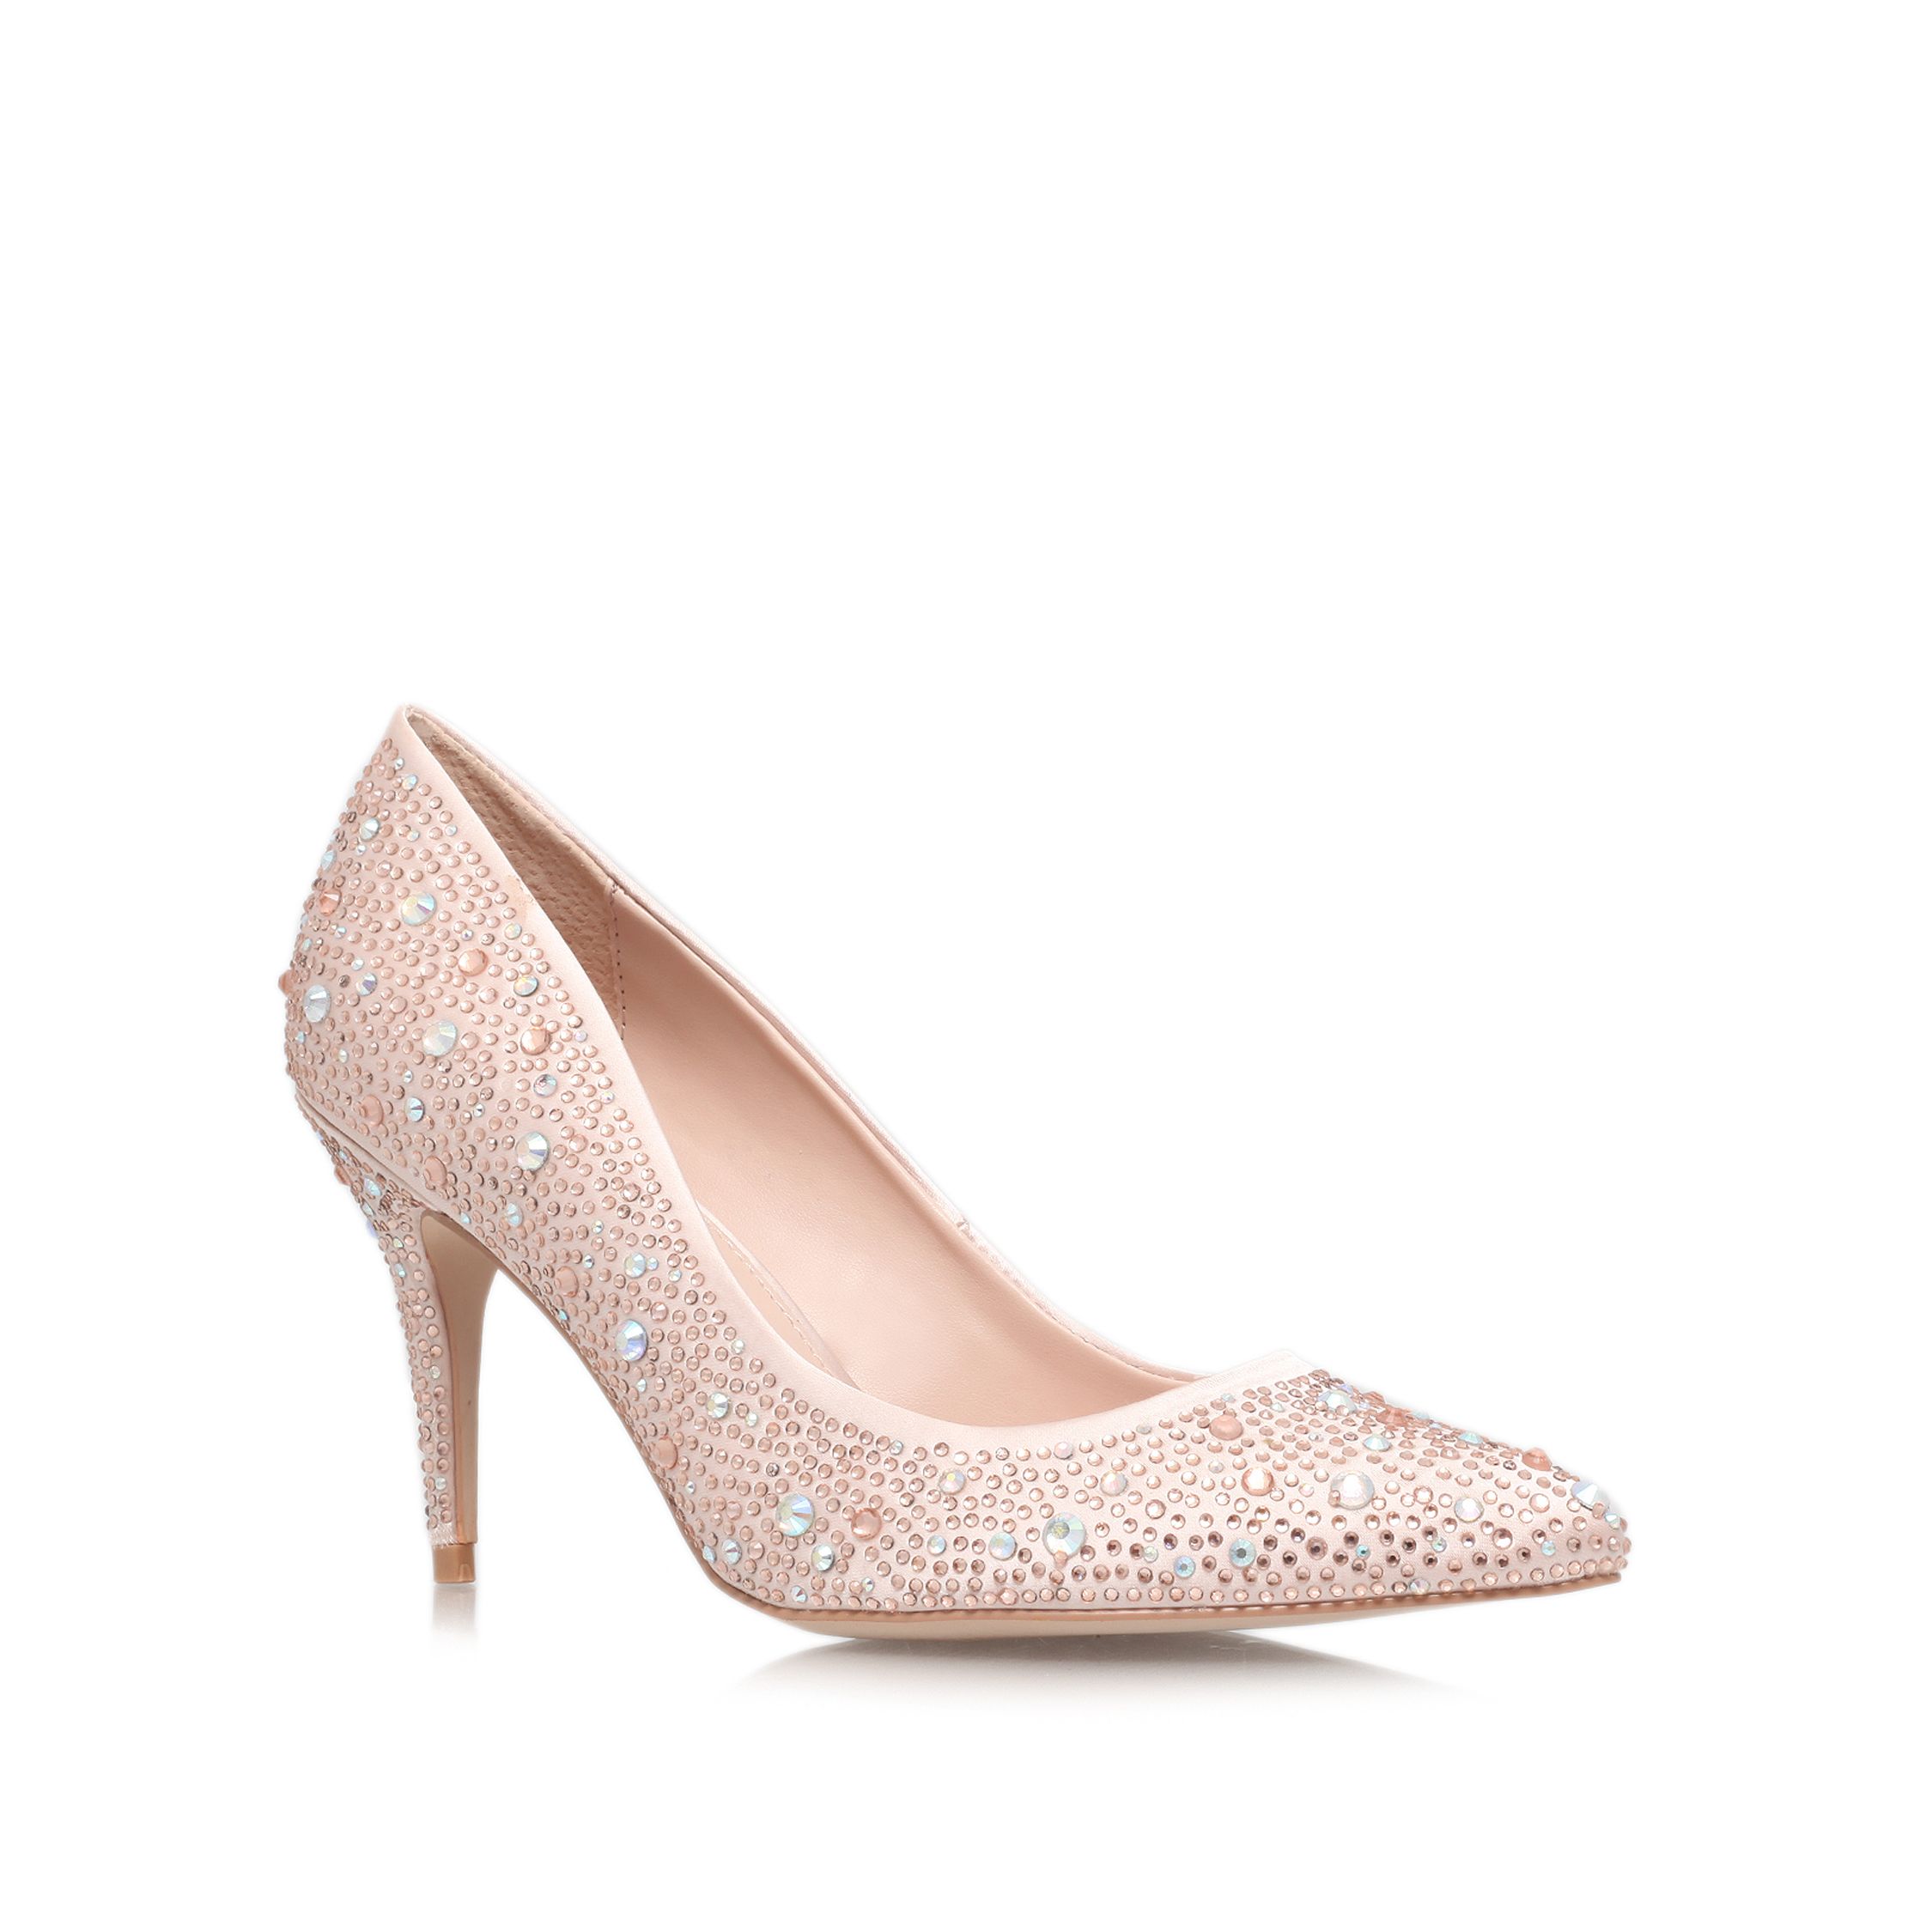 pale pink court shoes uk